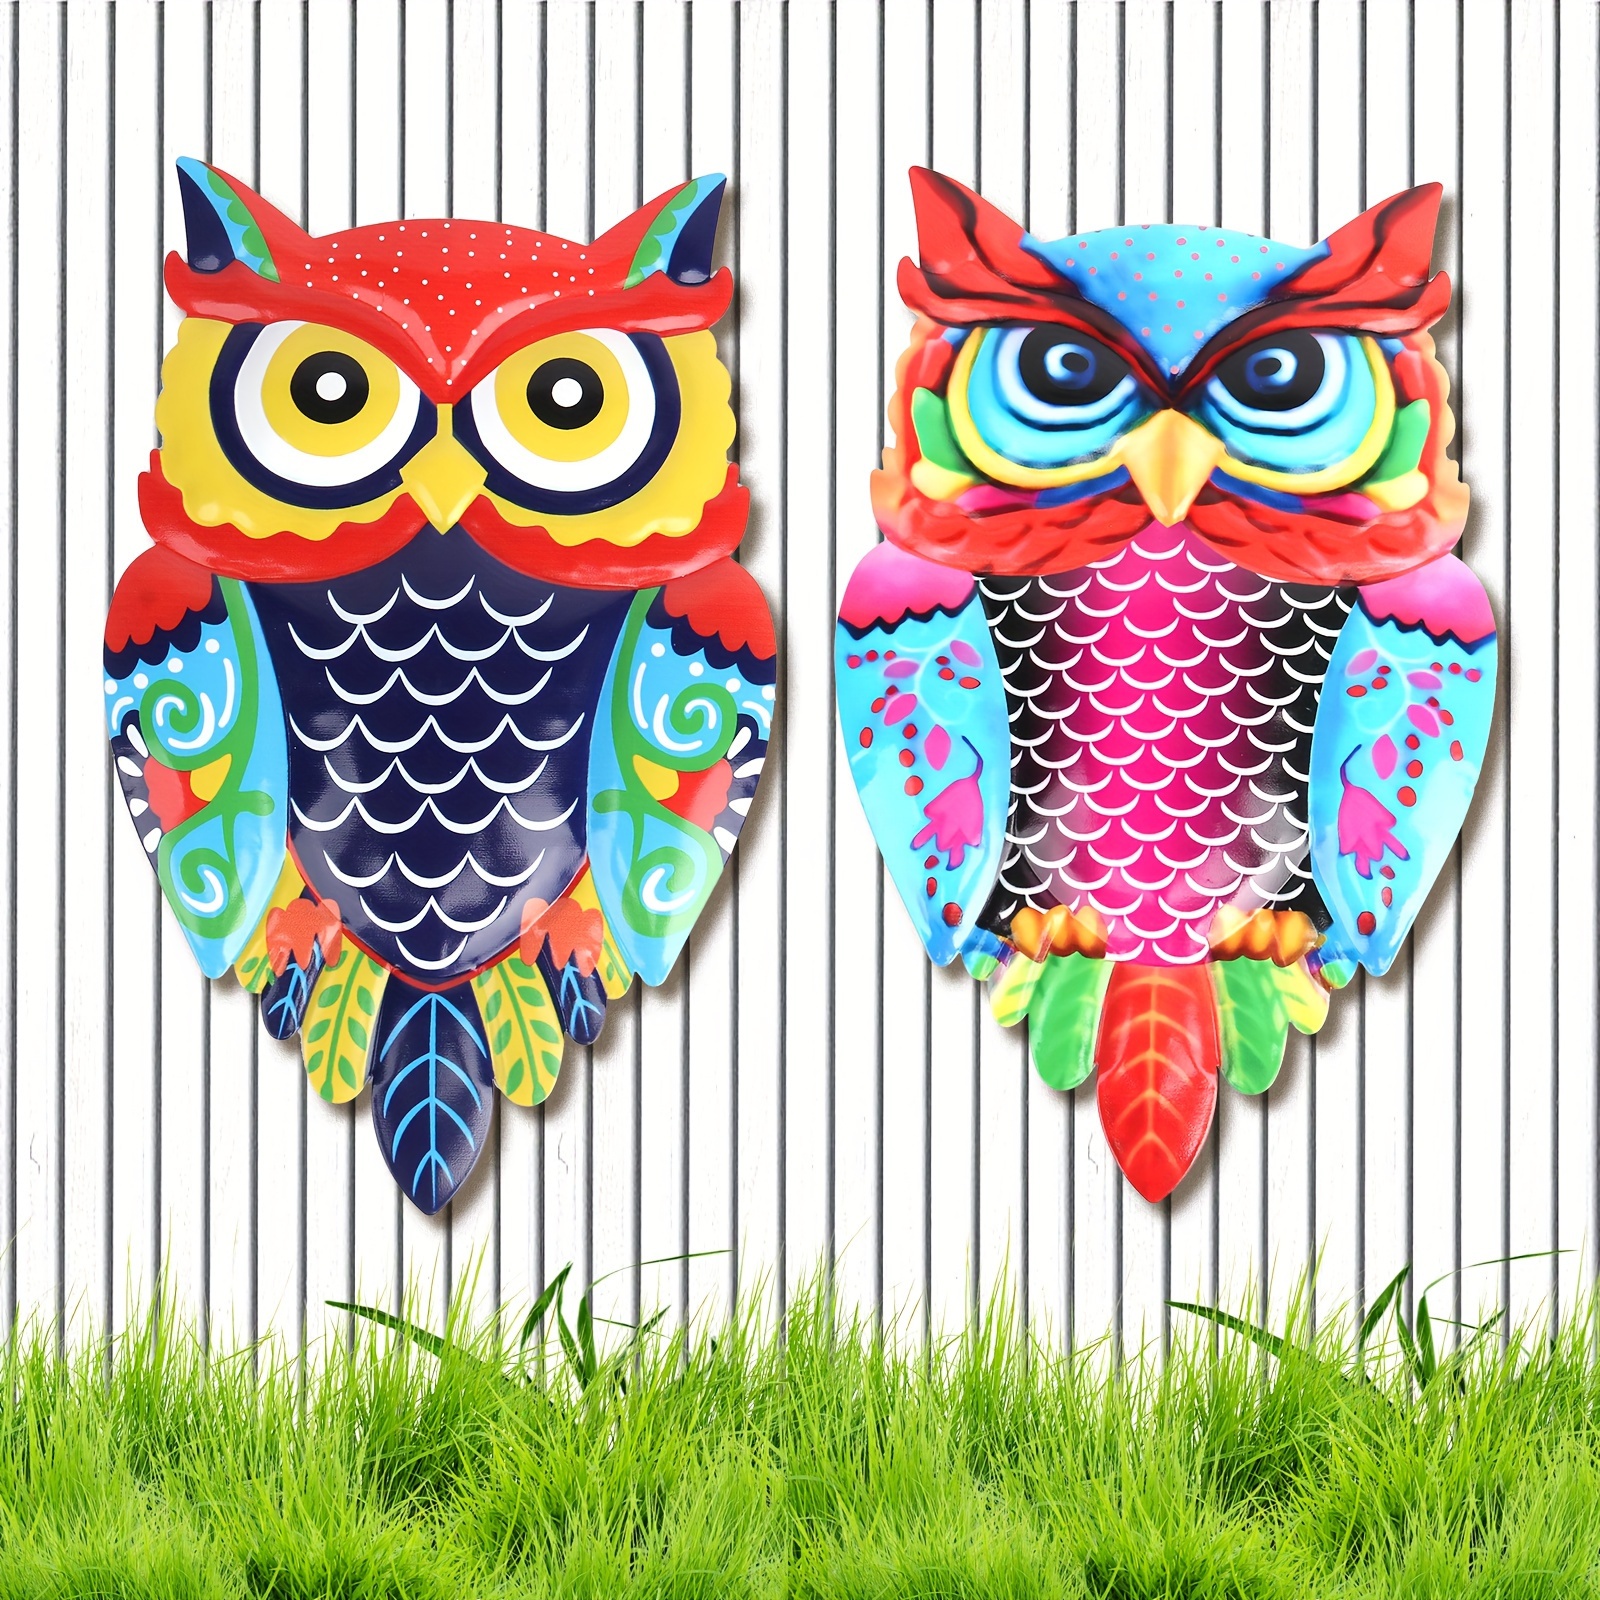 

2 Pcs Metal Yard Art Wall Decor Cute Owls For Outside Lawn Ornaments Fence Decorations Outdoor Wall Decorations